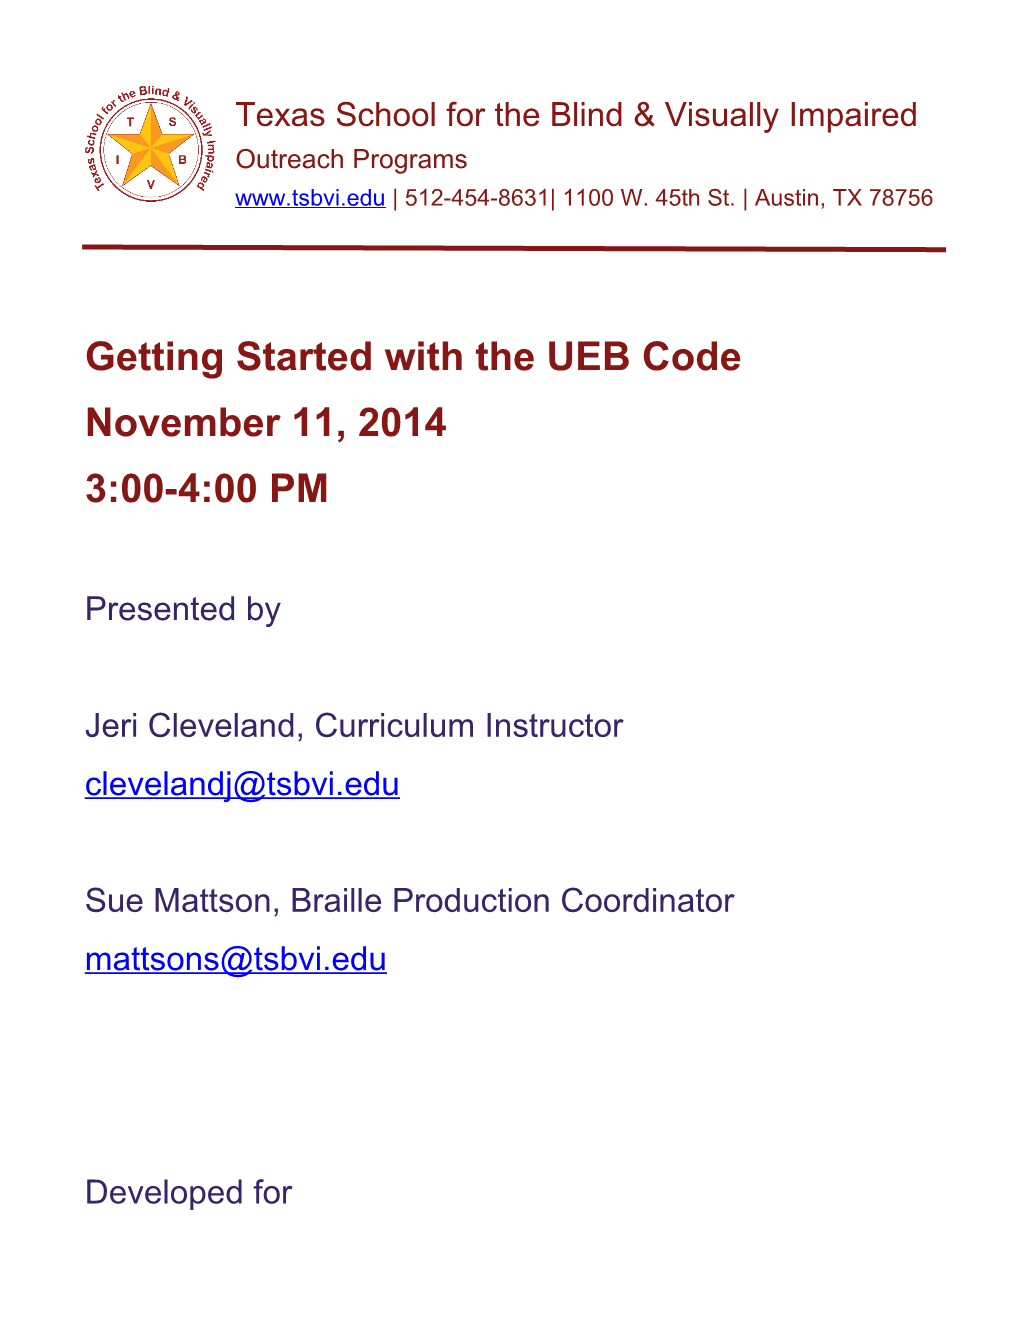 Getting Started with the UEB Code